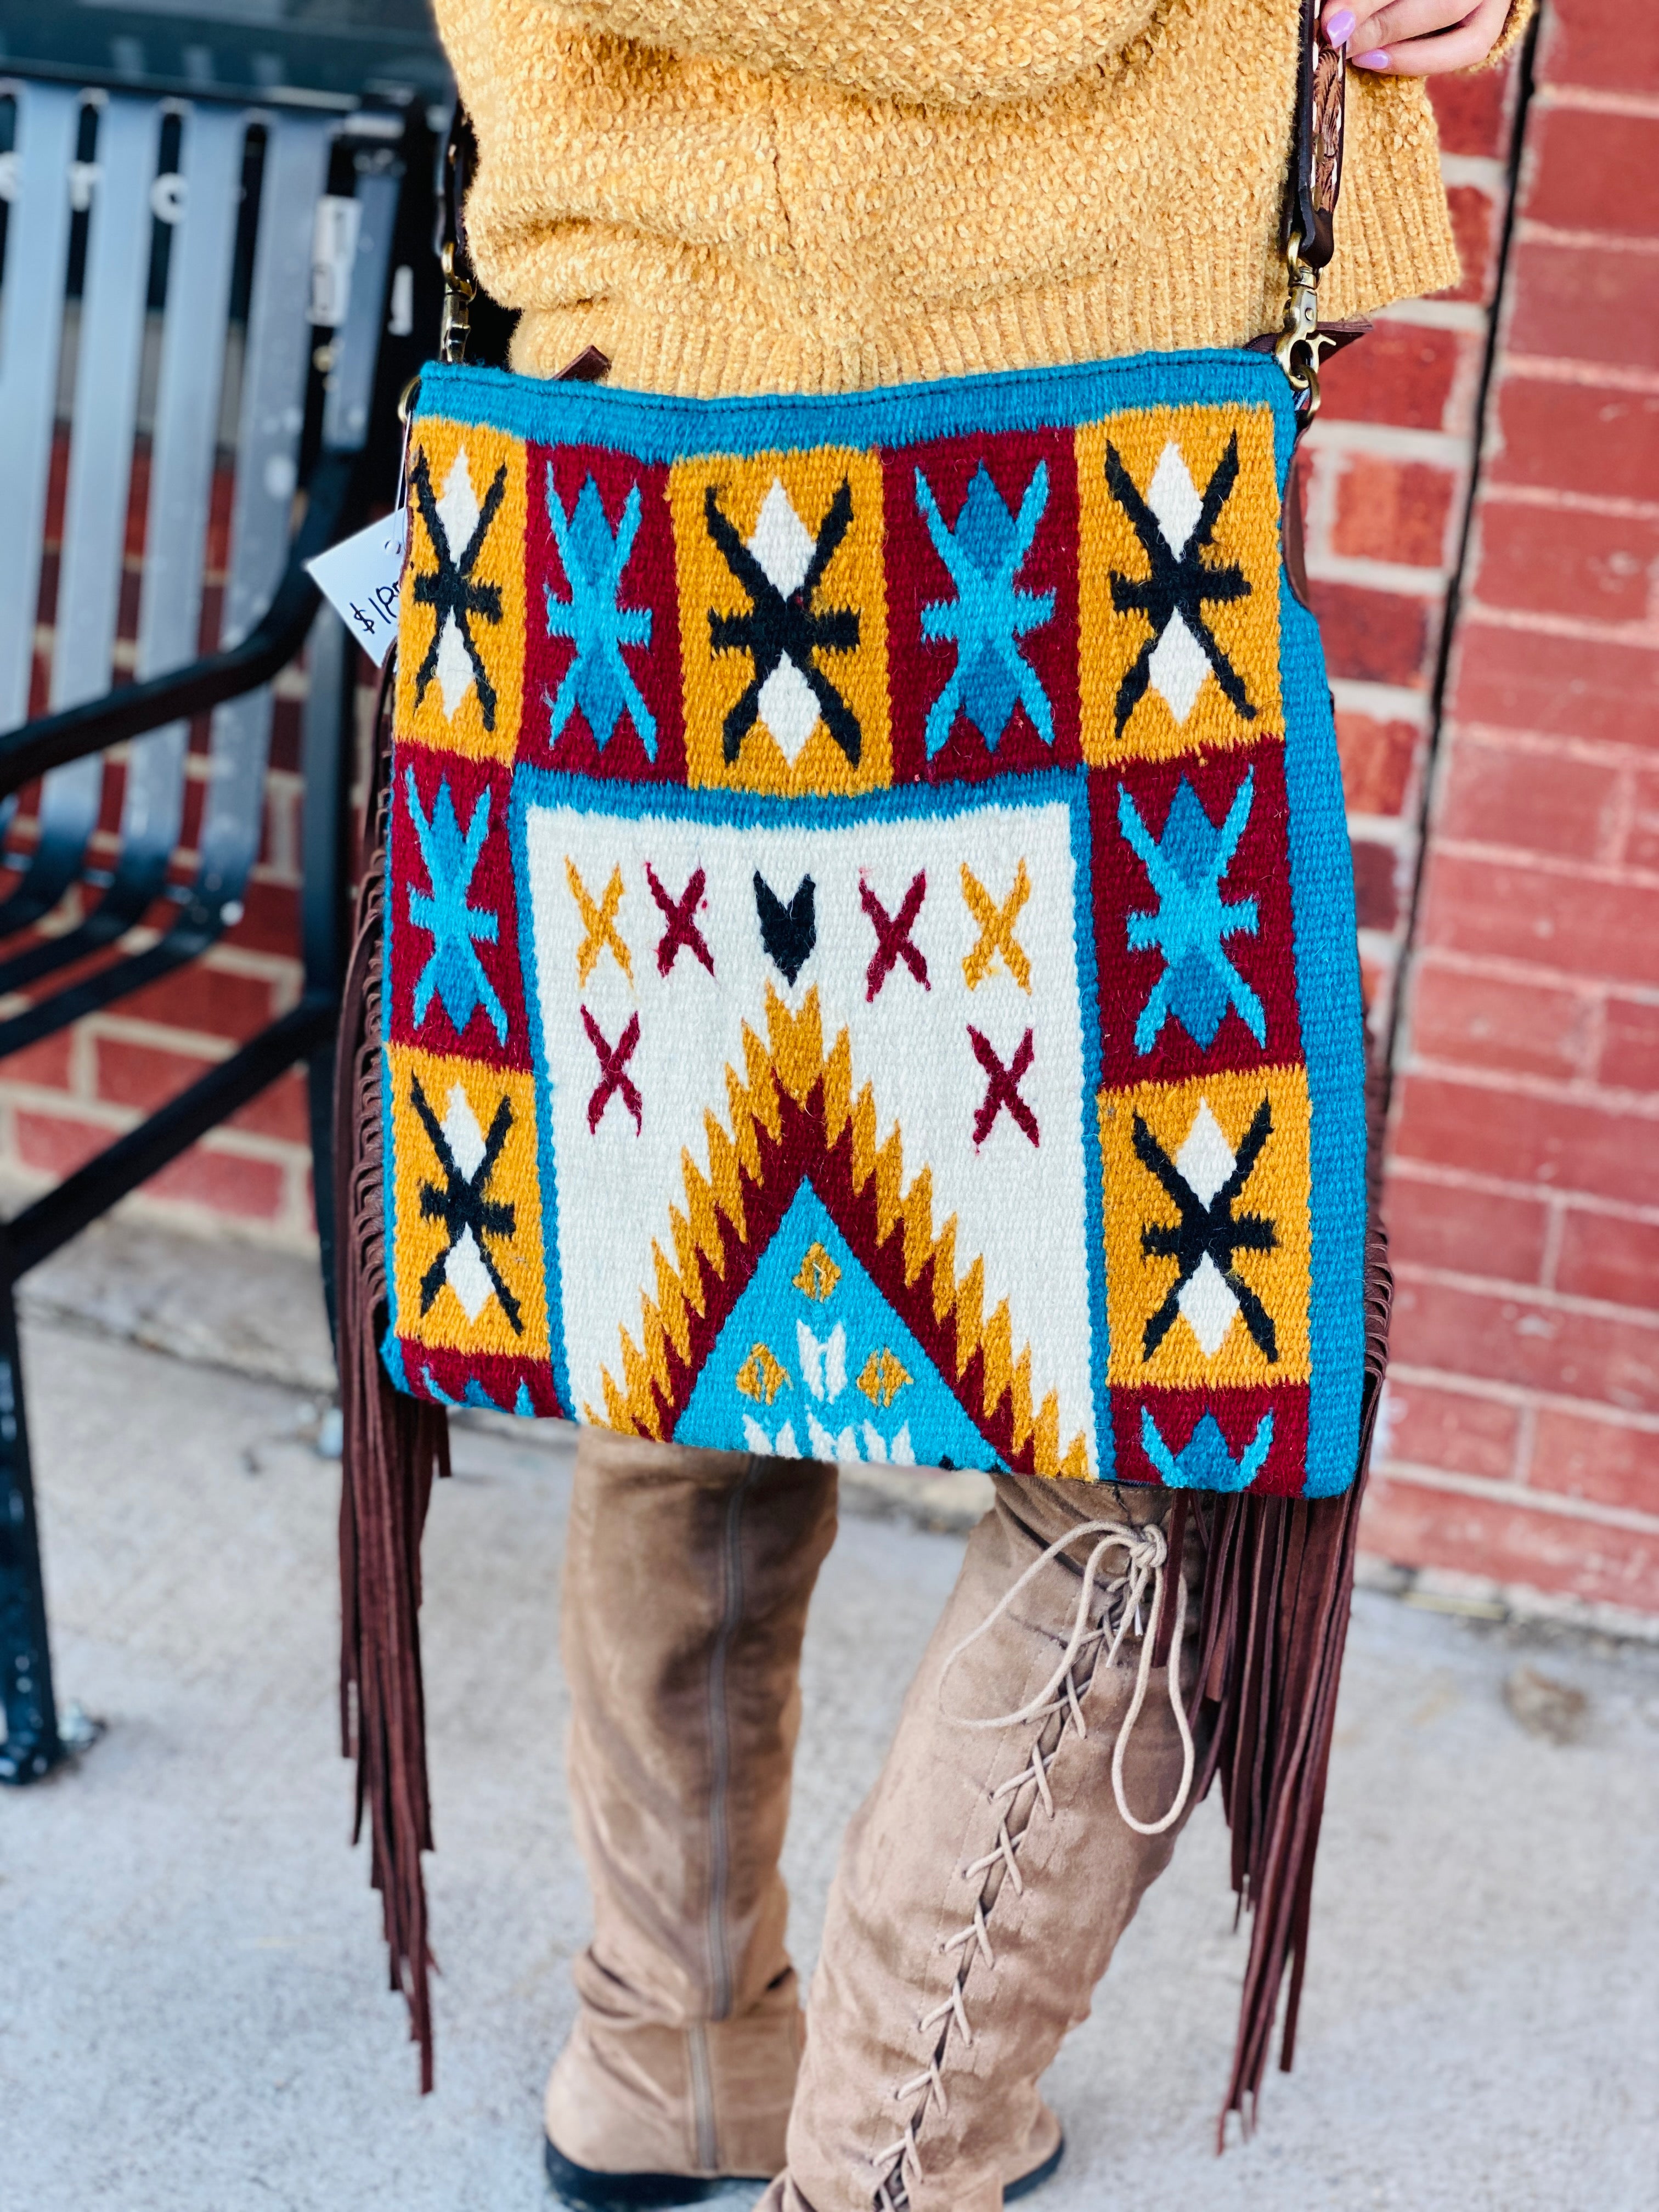 A Whole New World Saddle Blanket Genuine Leather American Darling Bag